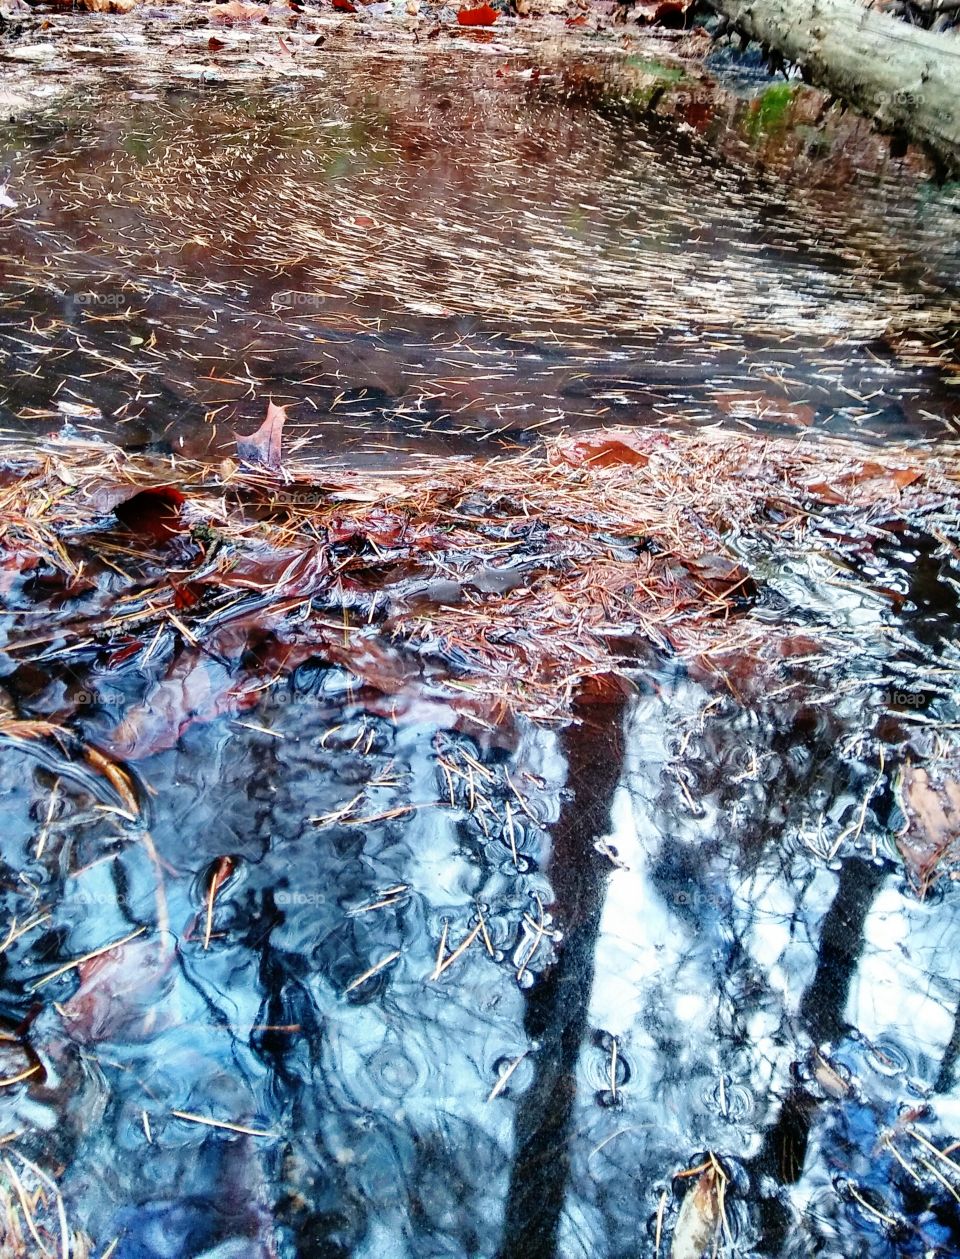 stream running through a forest with pine needles